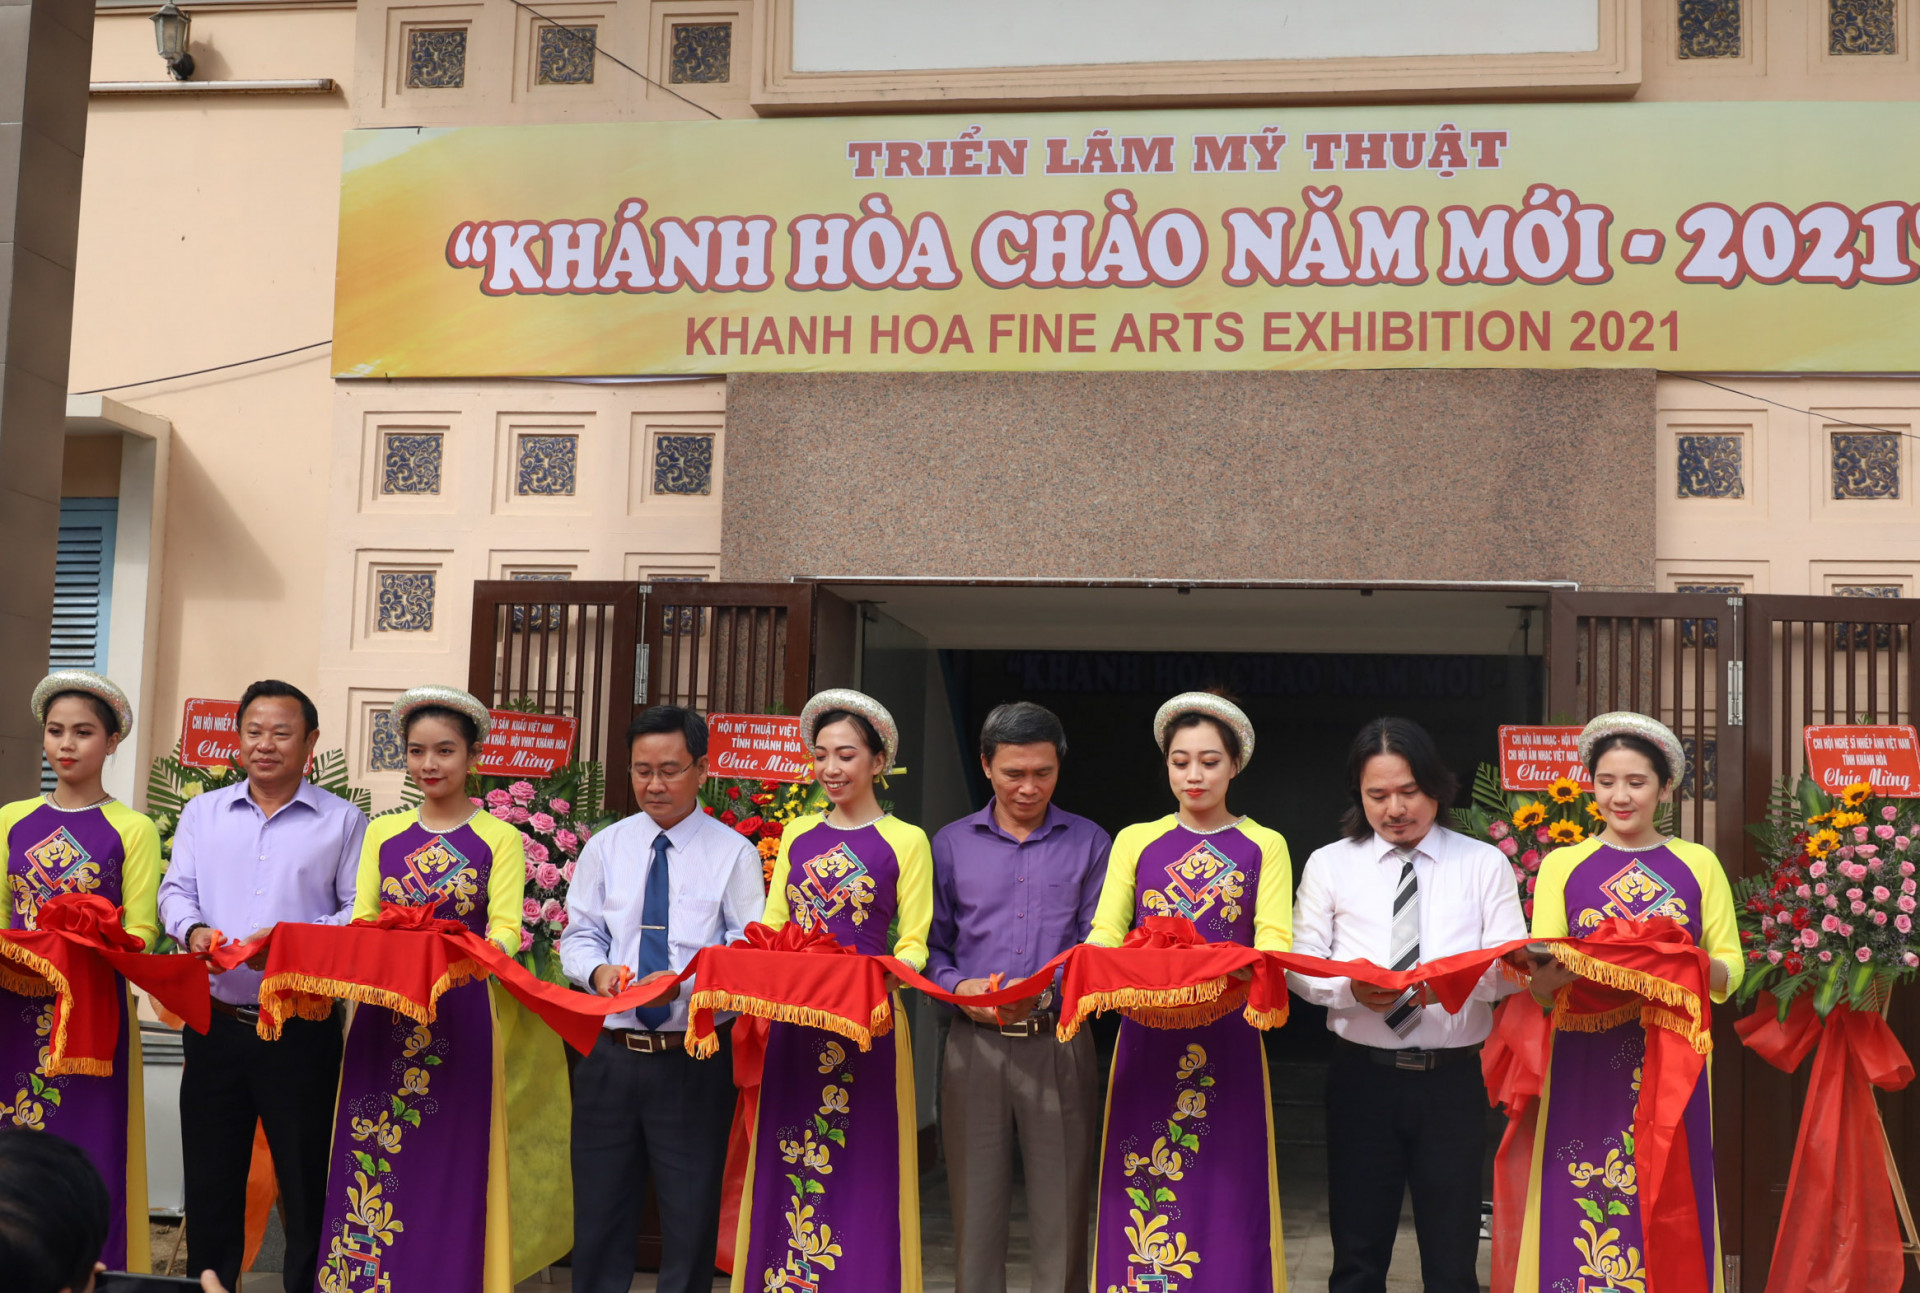 Representatives cutting ribbons to open exhibition